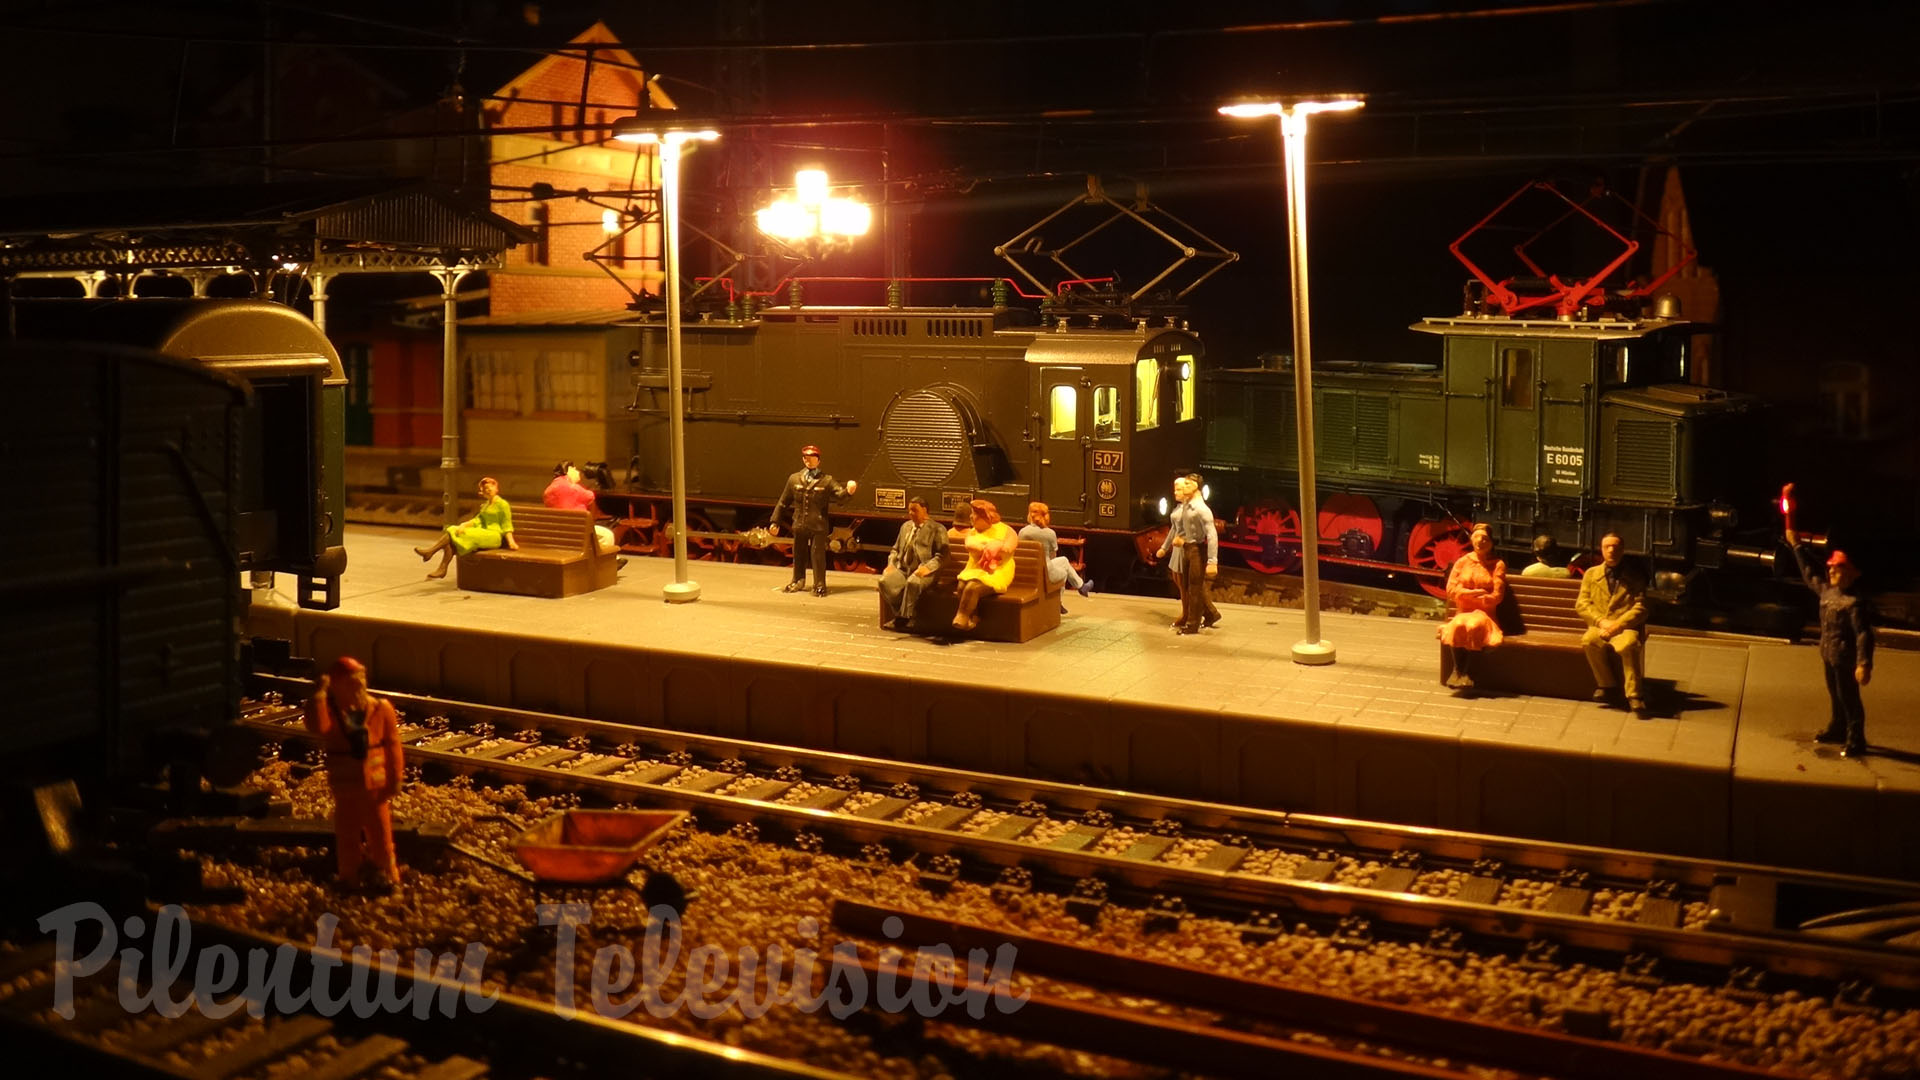 One of the finest German model railway layouts in small spaces - HO scale model train layout by Ignacio O'Callaghan